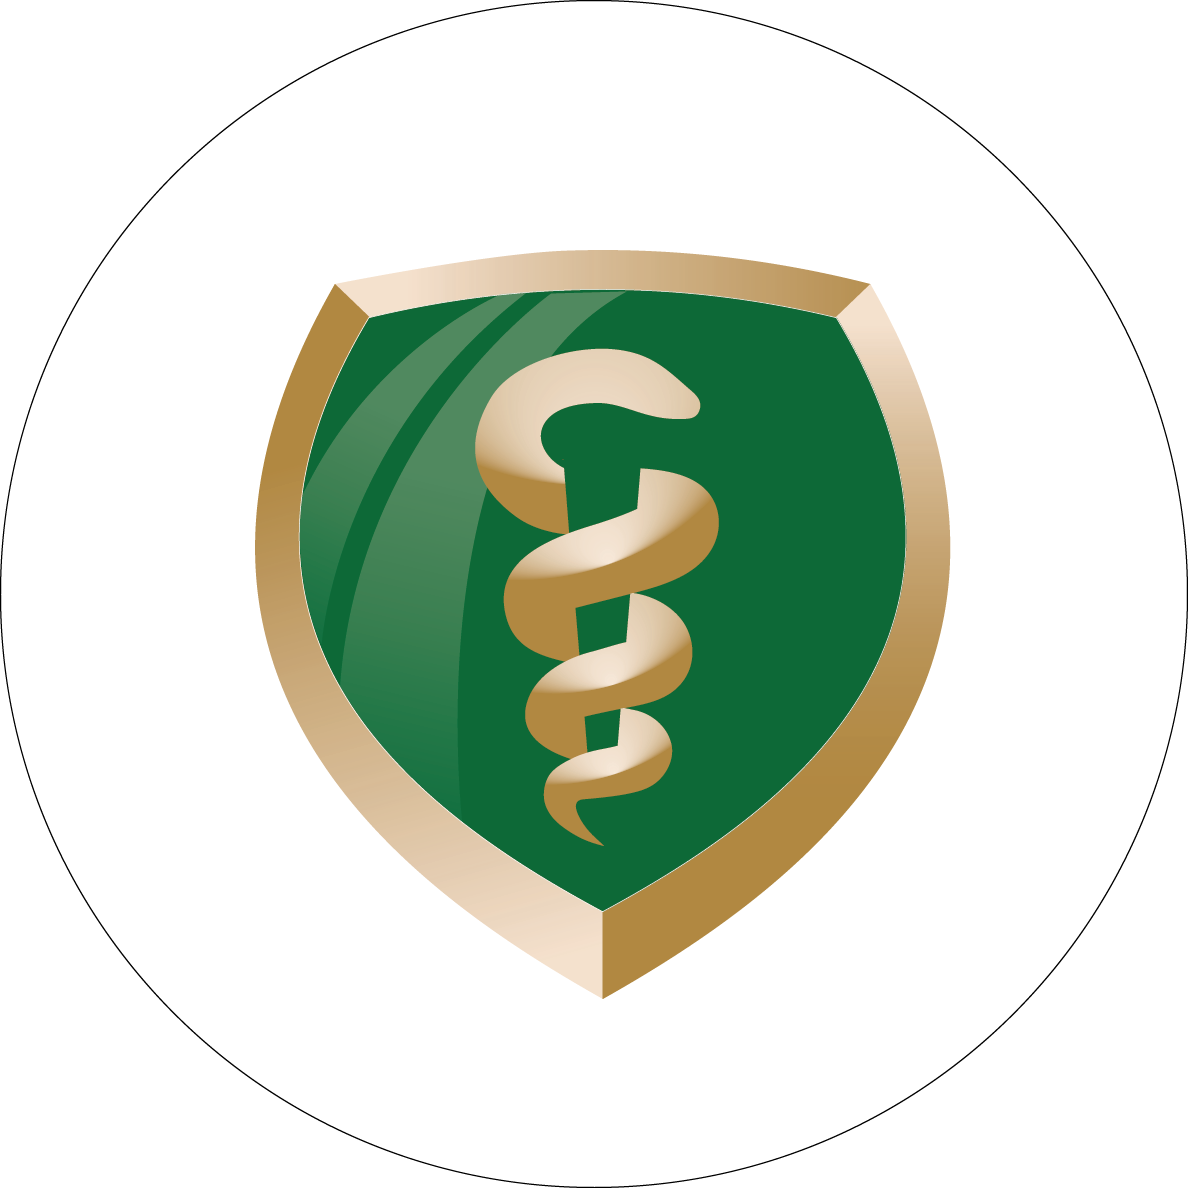 The Boonshoft School of Medicine full-color logo is reserved for the school's main social media channel. 